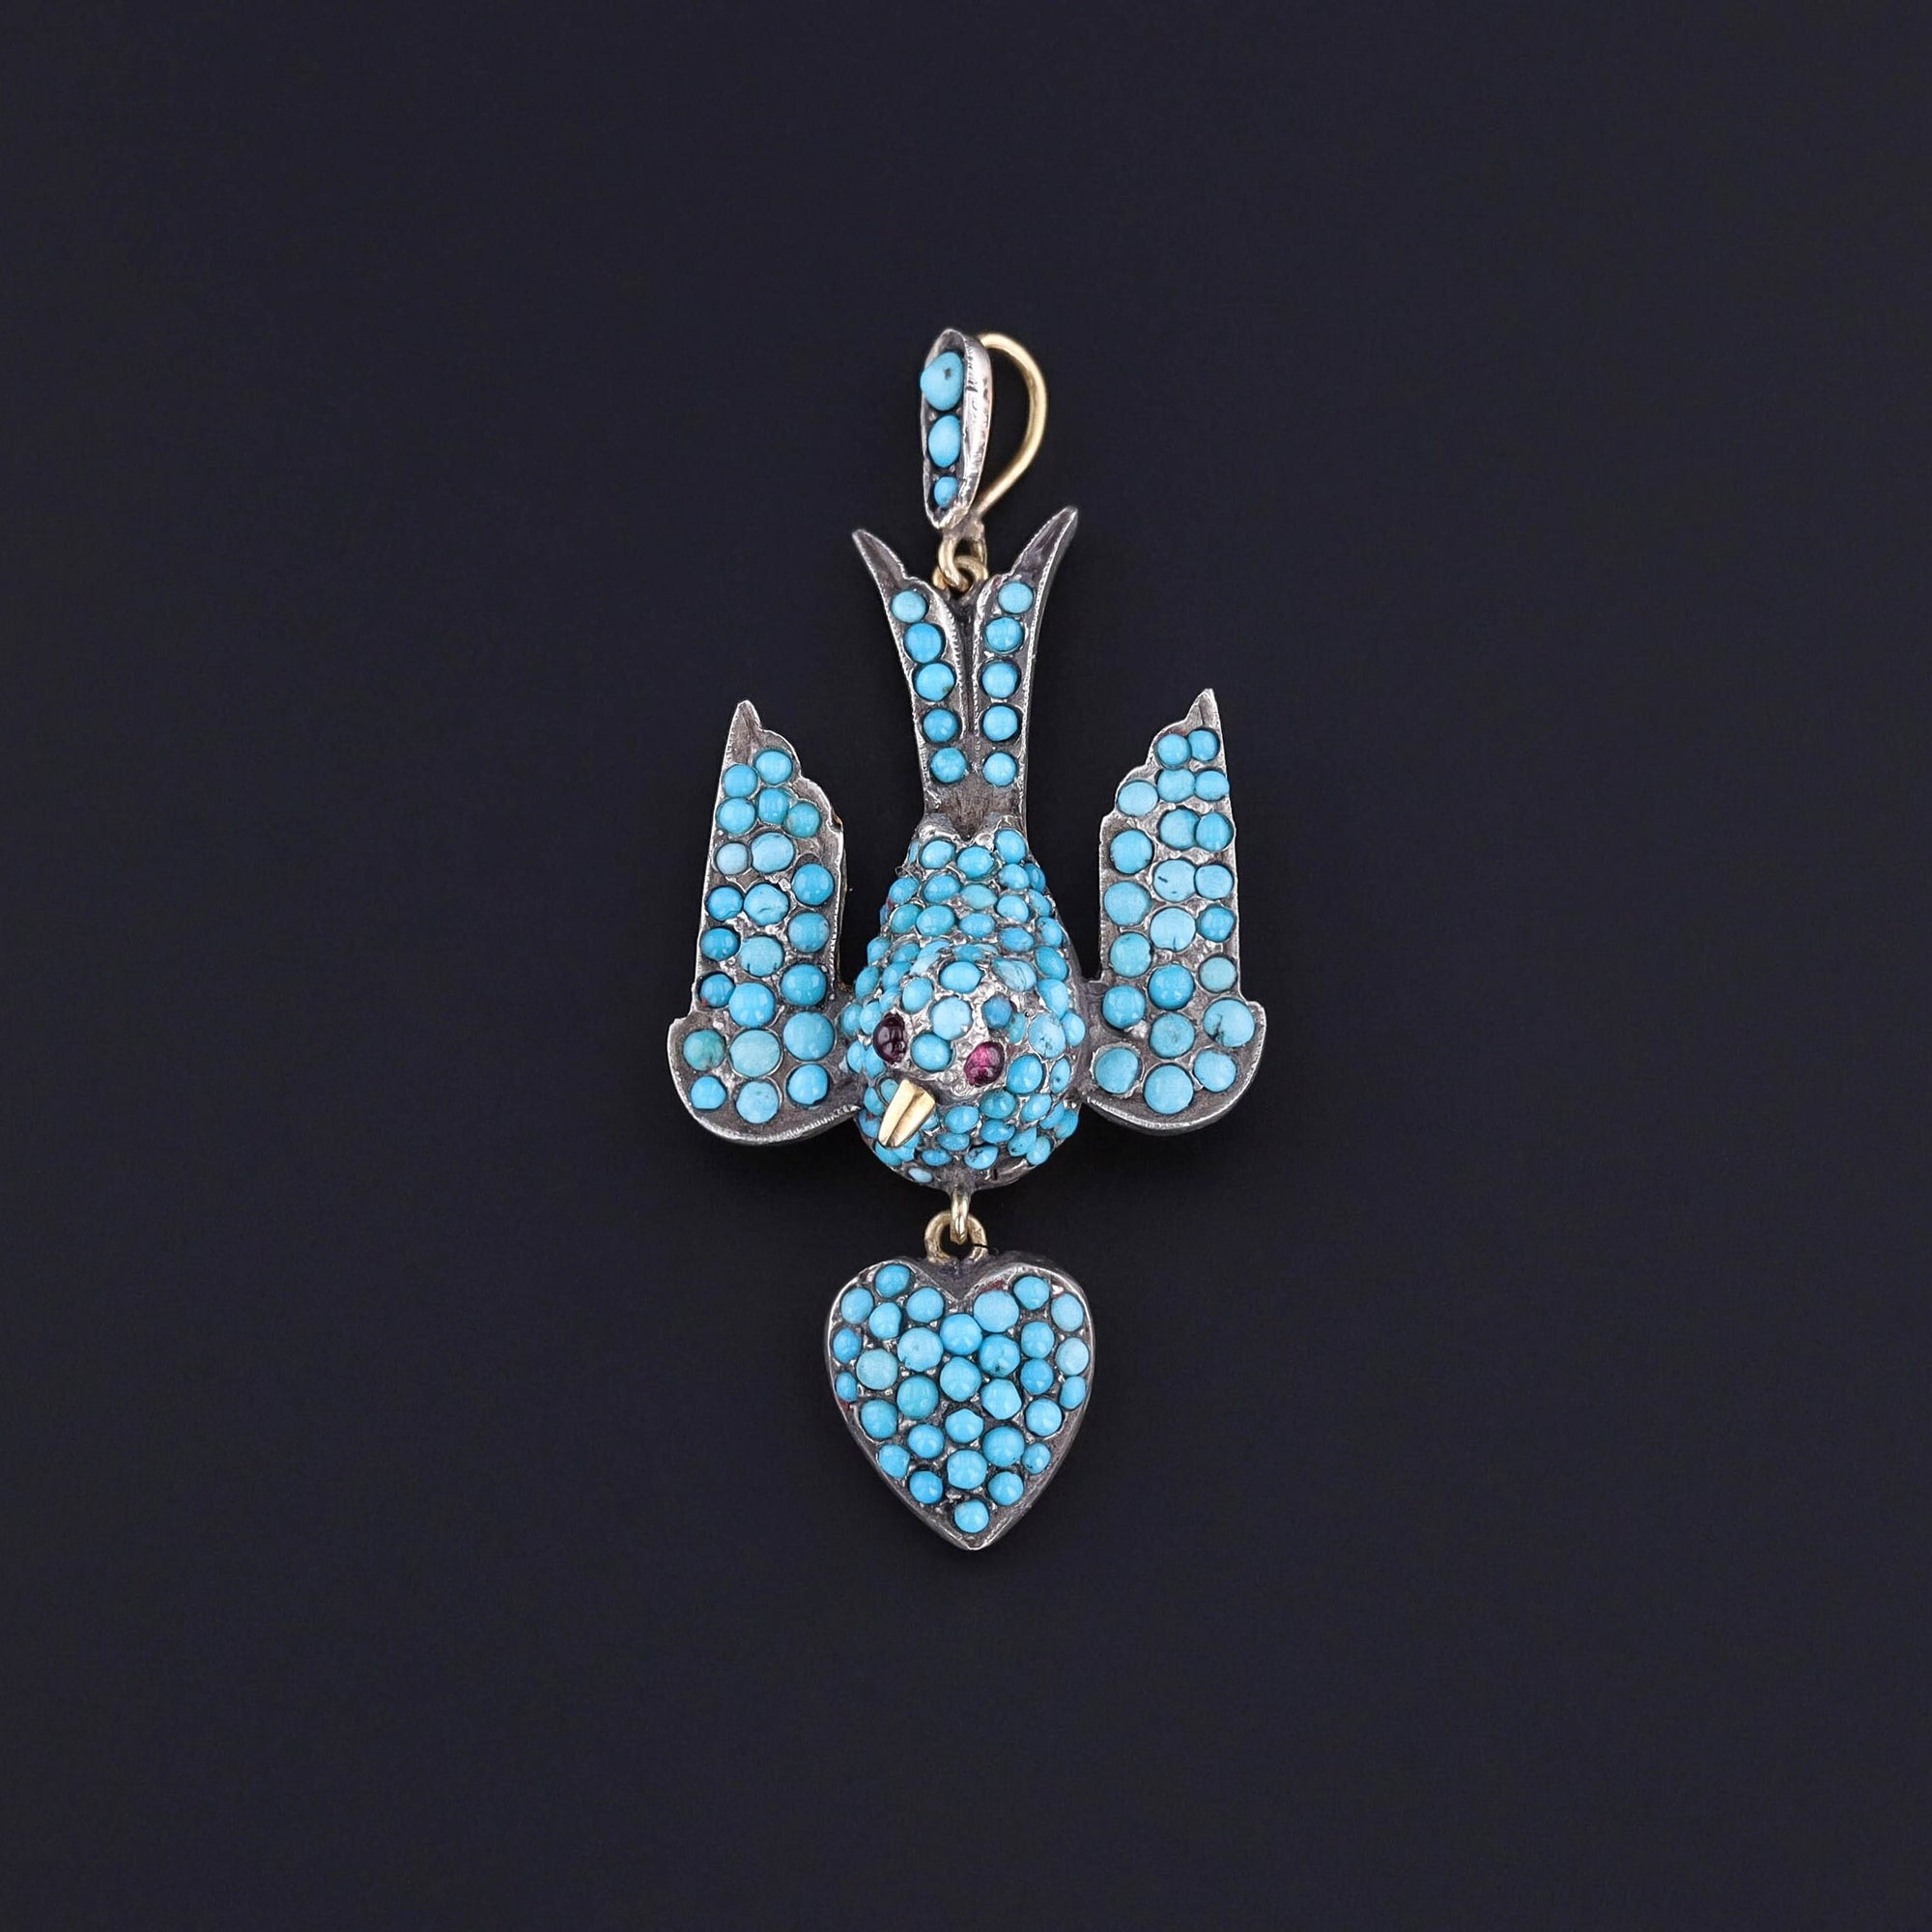 A Victorian era swallow pendant featuring pave set turquoise. The piece is in excellent condition and silver topped 18k gold.